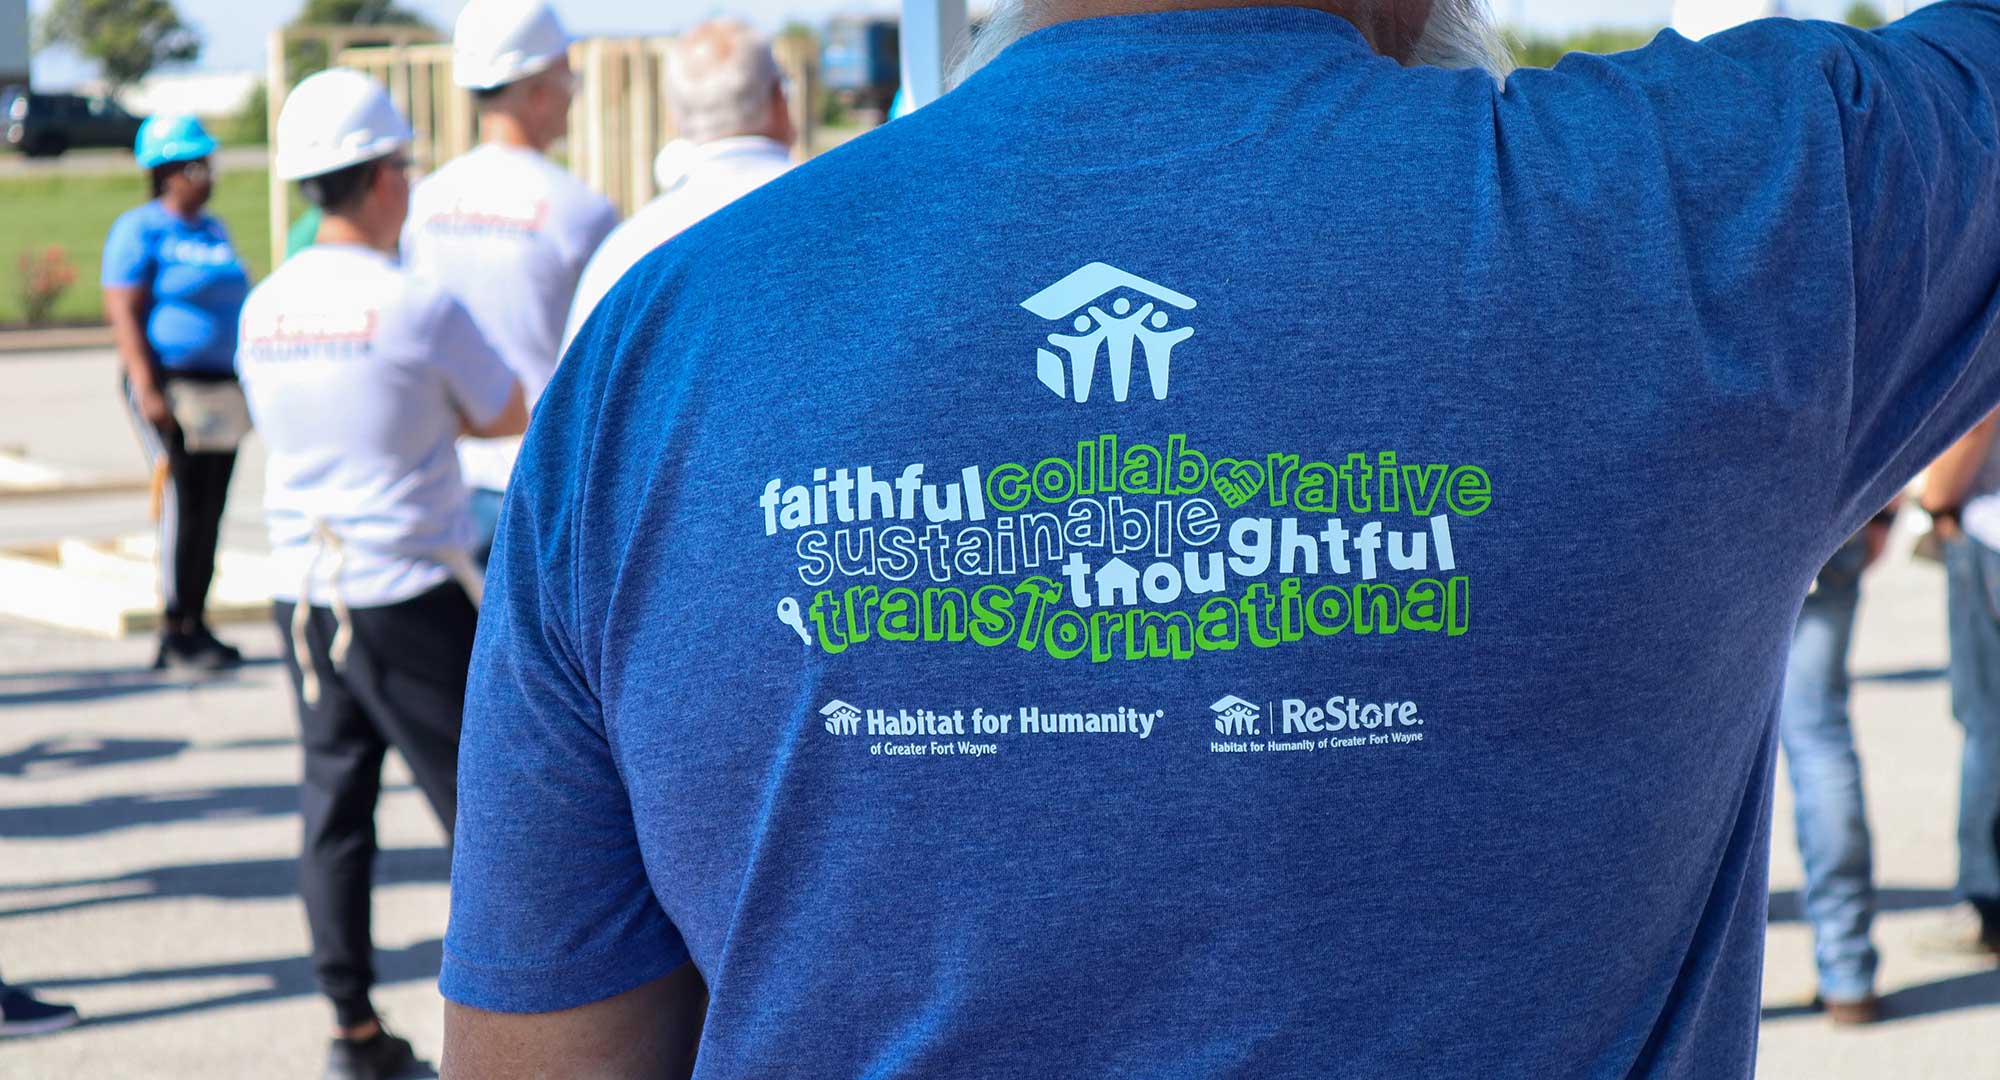 Back of shirt reads "Faithful, collaborative, sustainable, thoughtful, transformational"